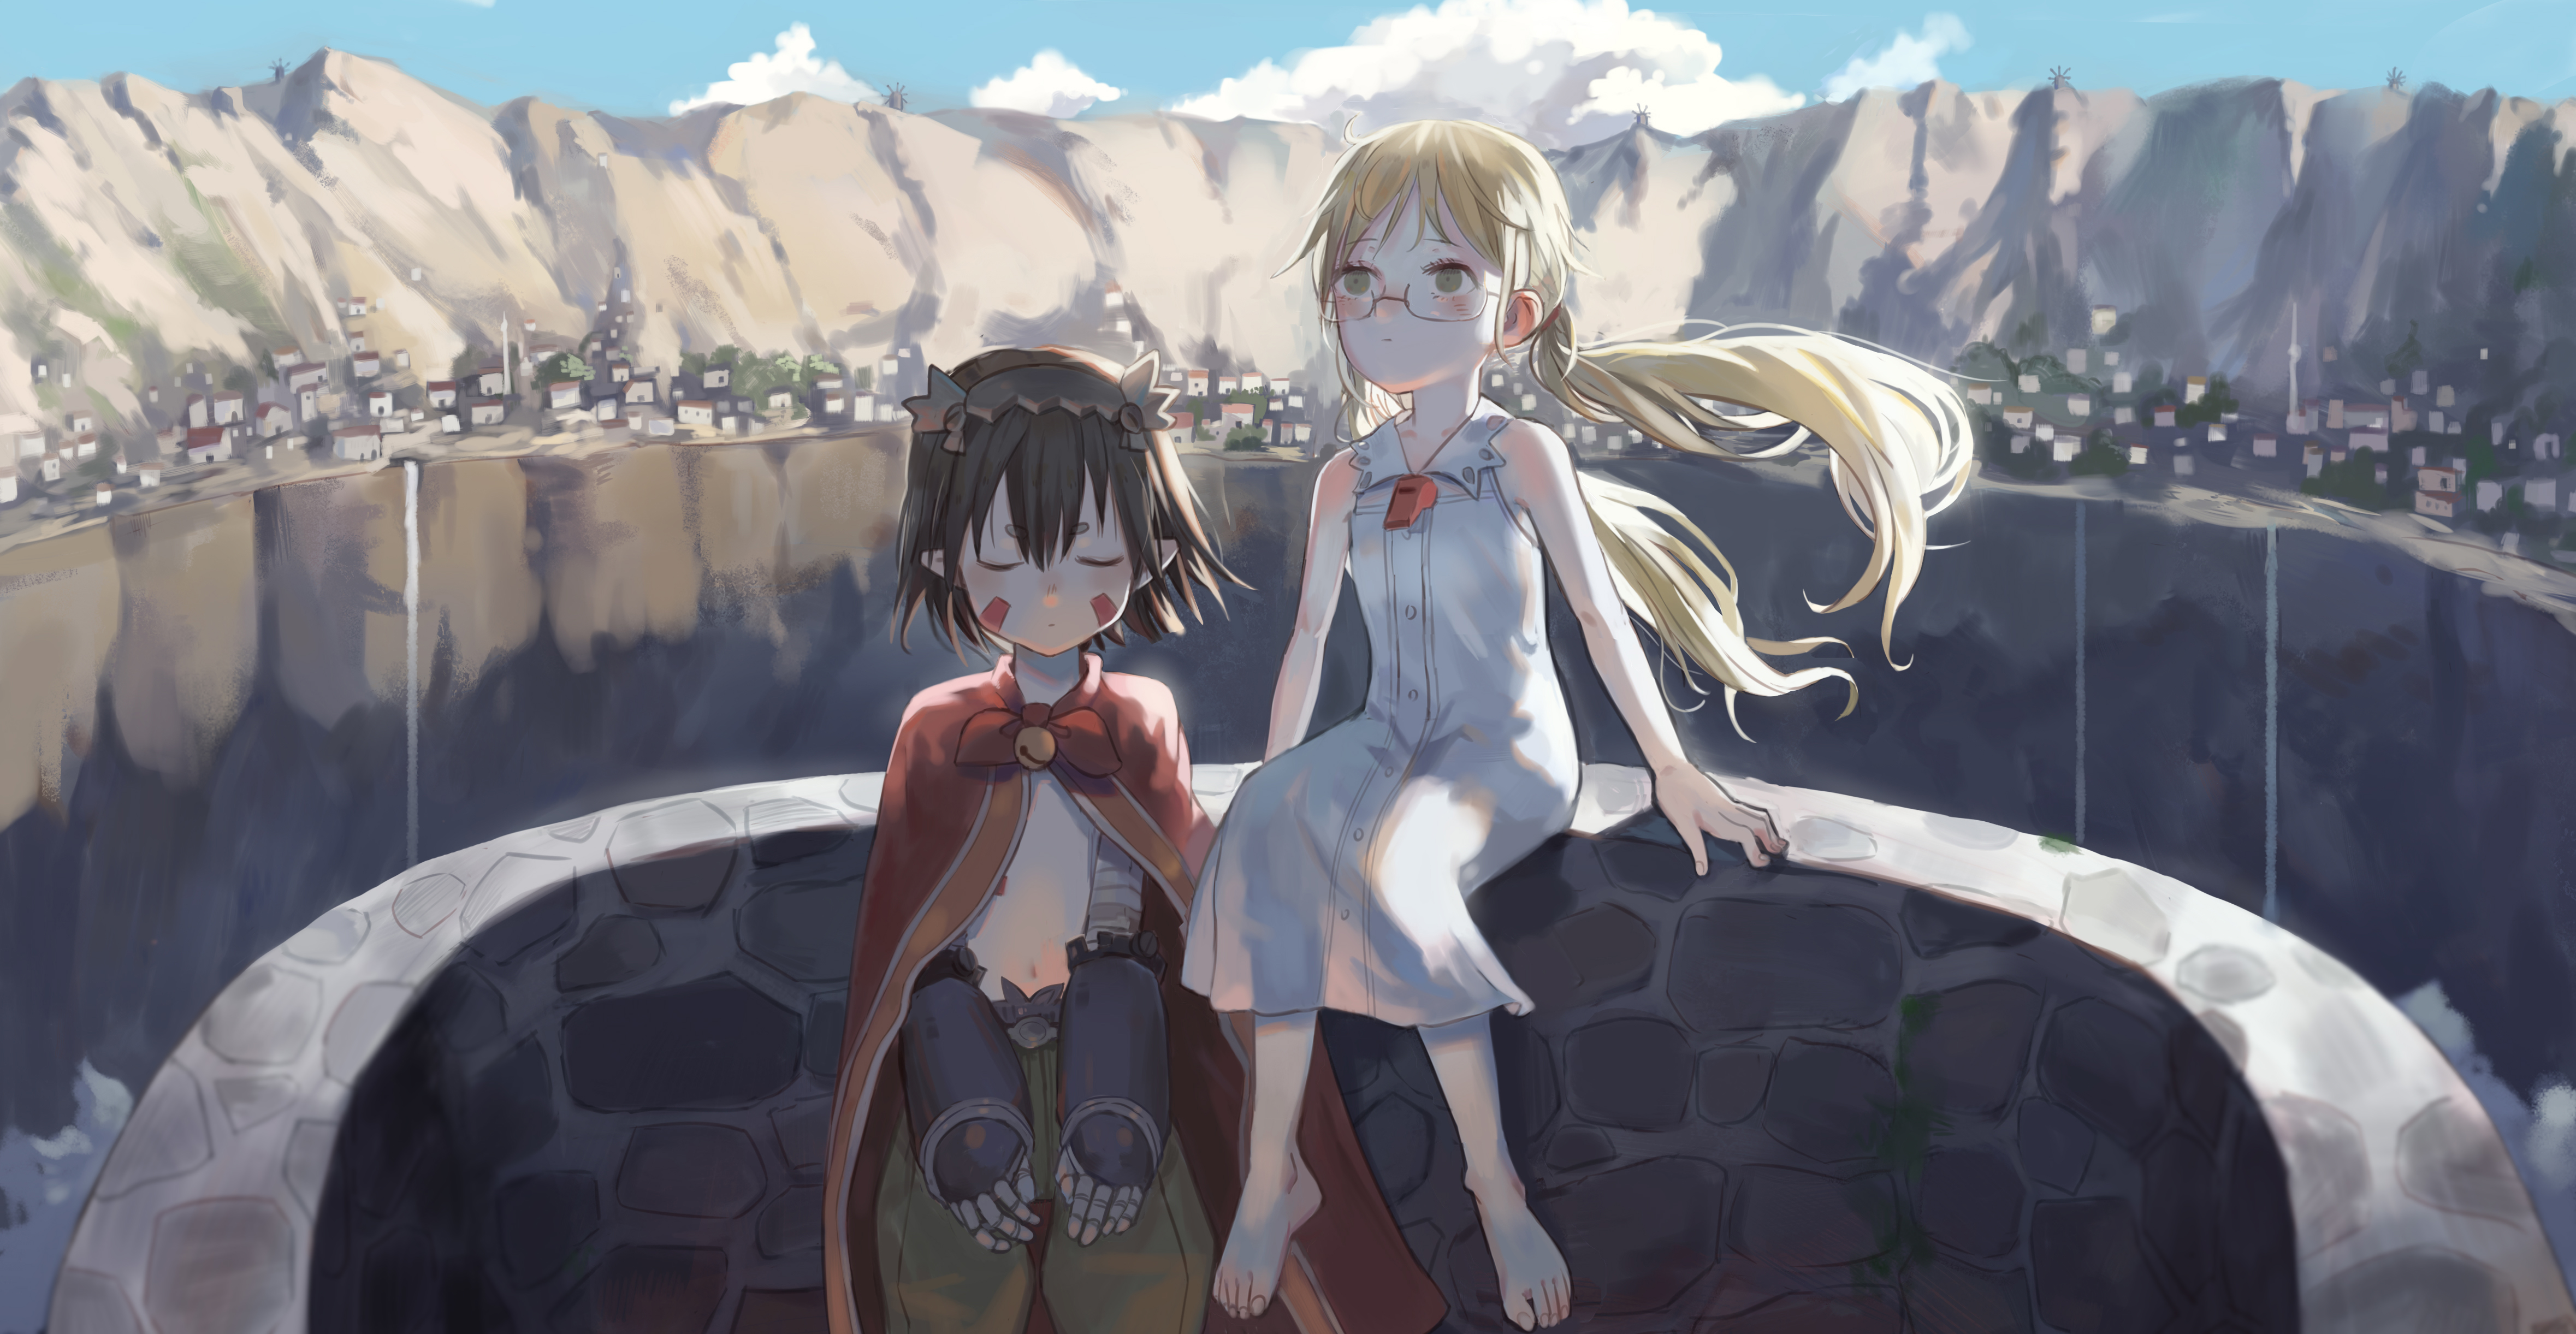 Anime 4717x2443 Made in Abyss Regu (Made in Abyss) Riko (Made in Abyss) anime boys anime girls white dress robot loli 2D anime meganekko twintails blushing closed eyes hair blowing in the wind fan art brunette long hair short hair green eyes blonde